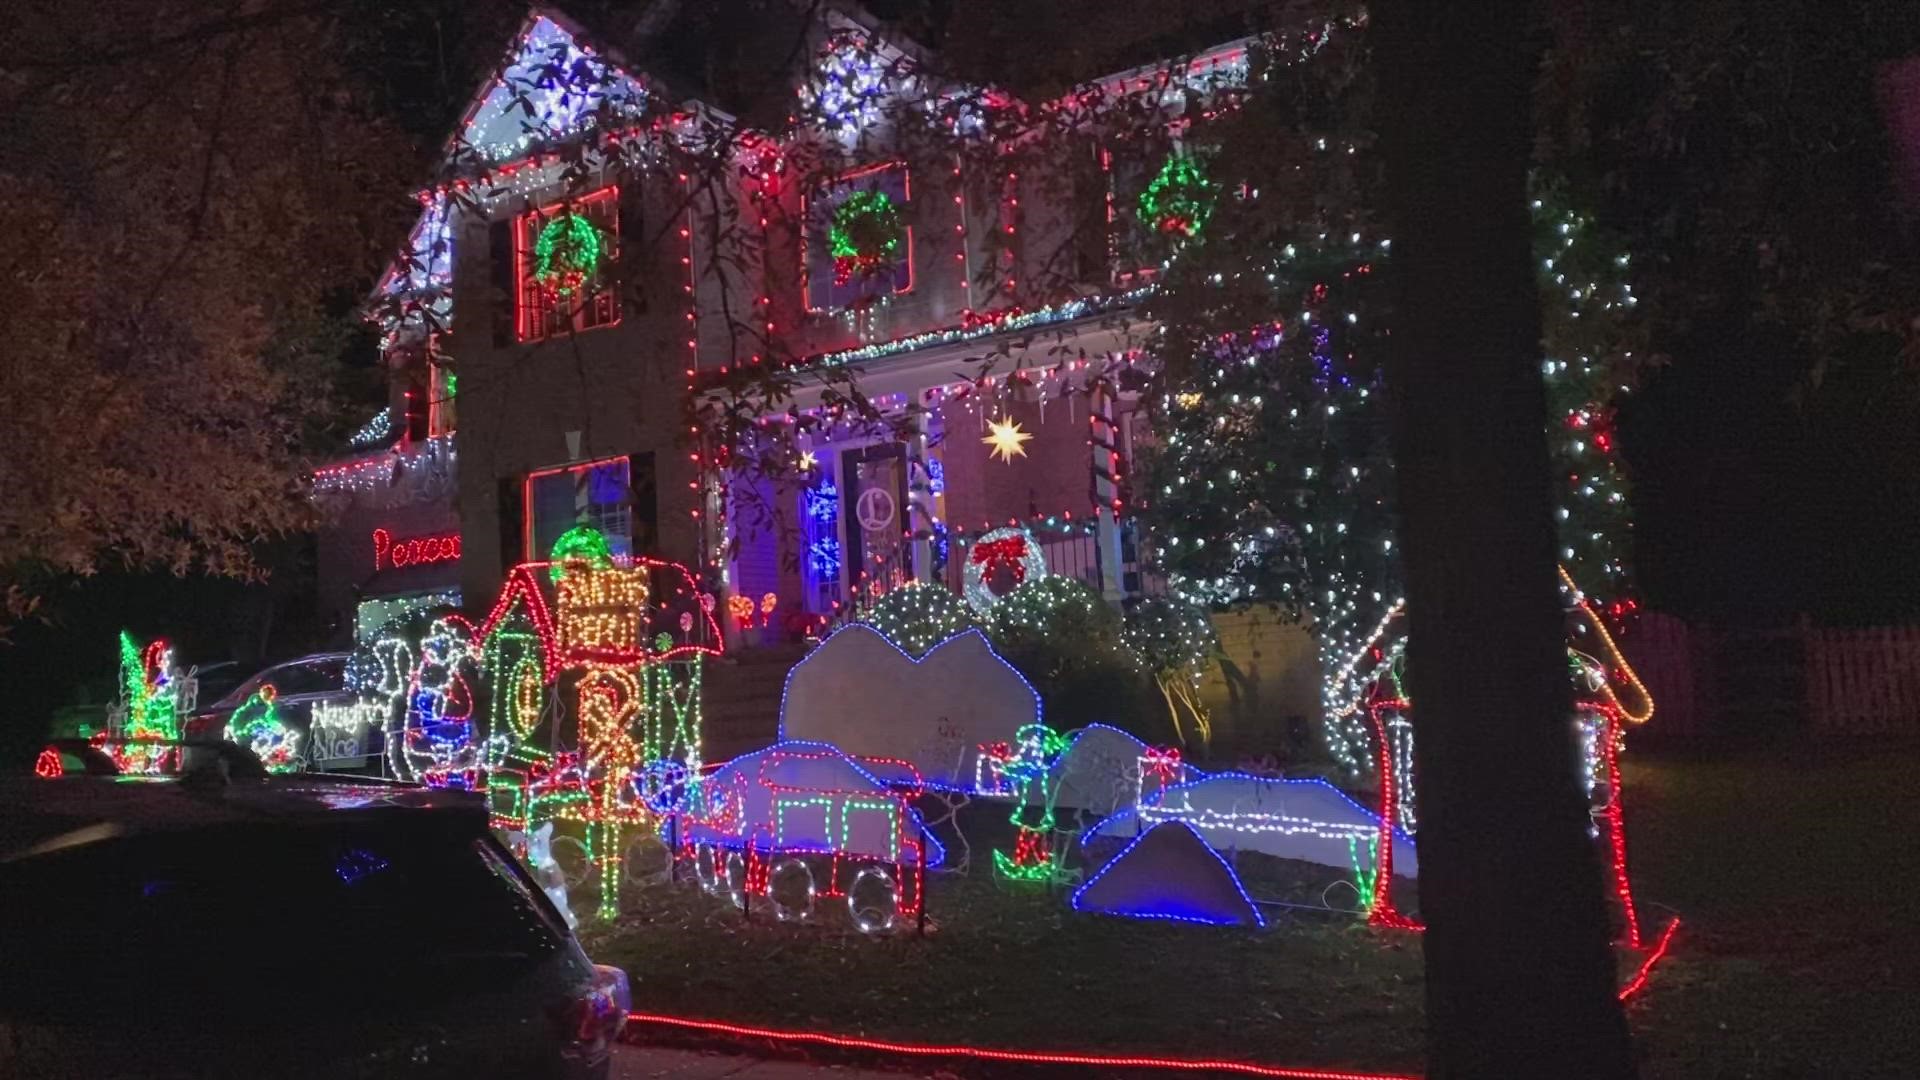 Neighbors in the MacAulay neighborhood go all out against each other for bragging rights when it comes to holiday lights!